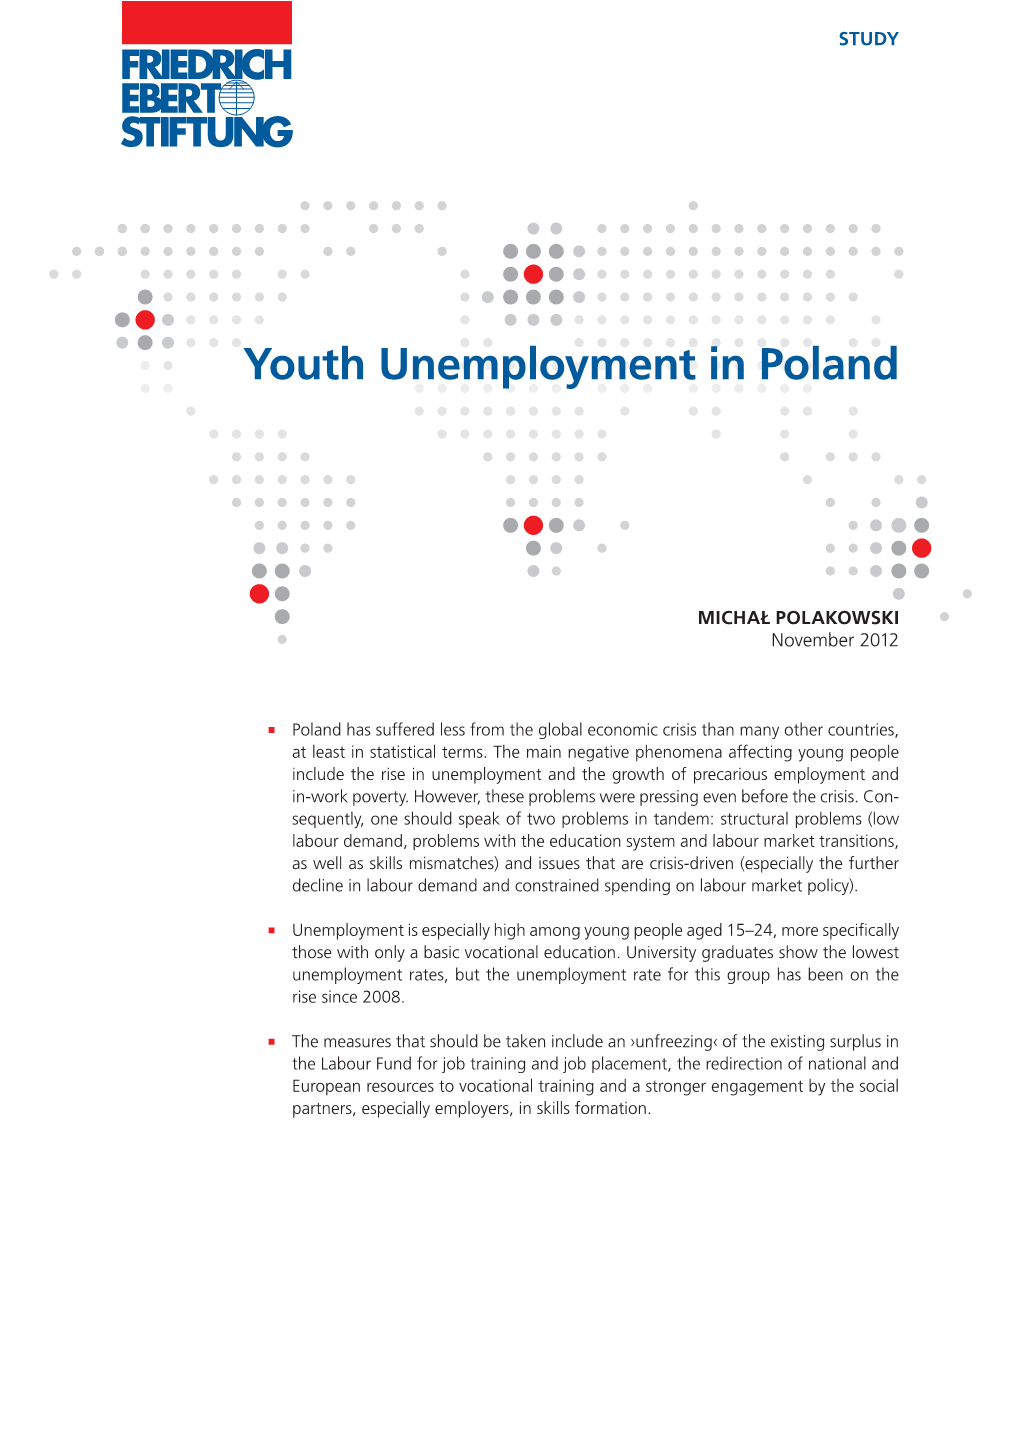 Youth Unemployment in Poland